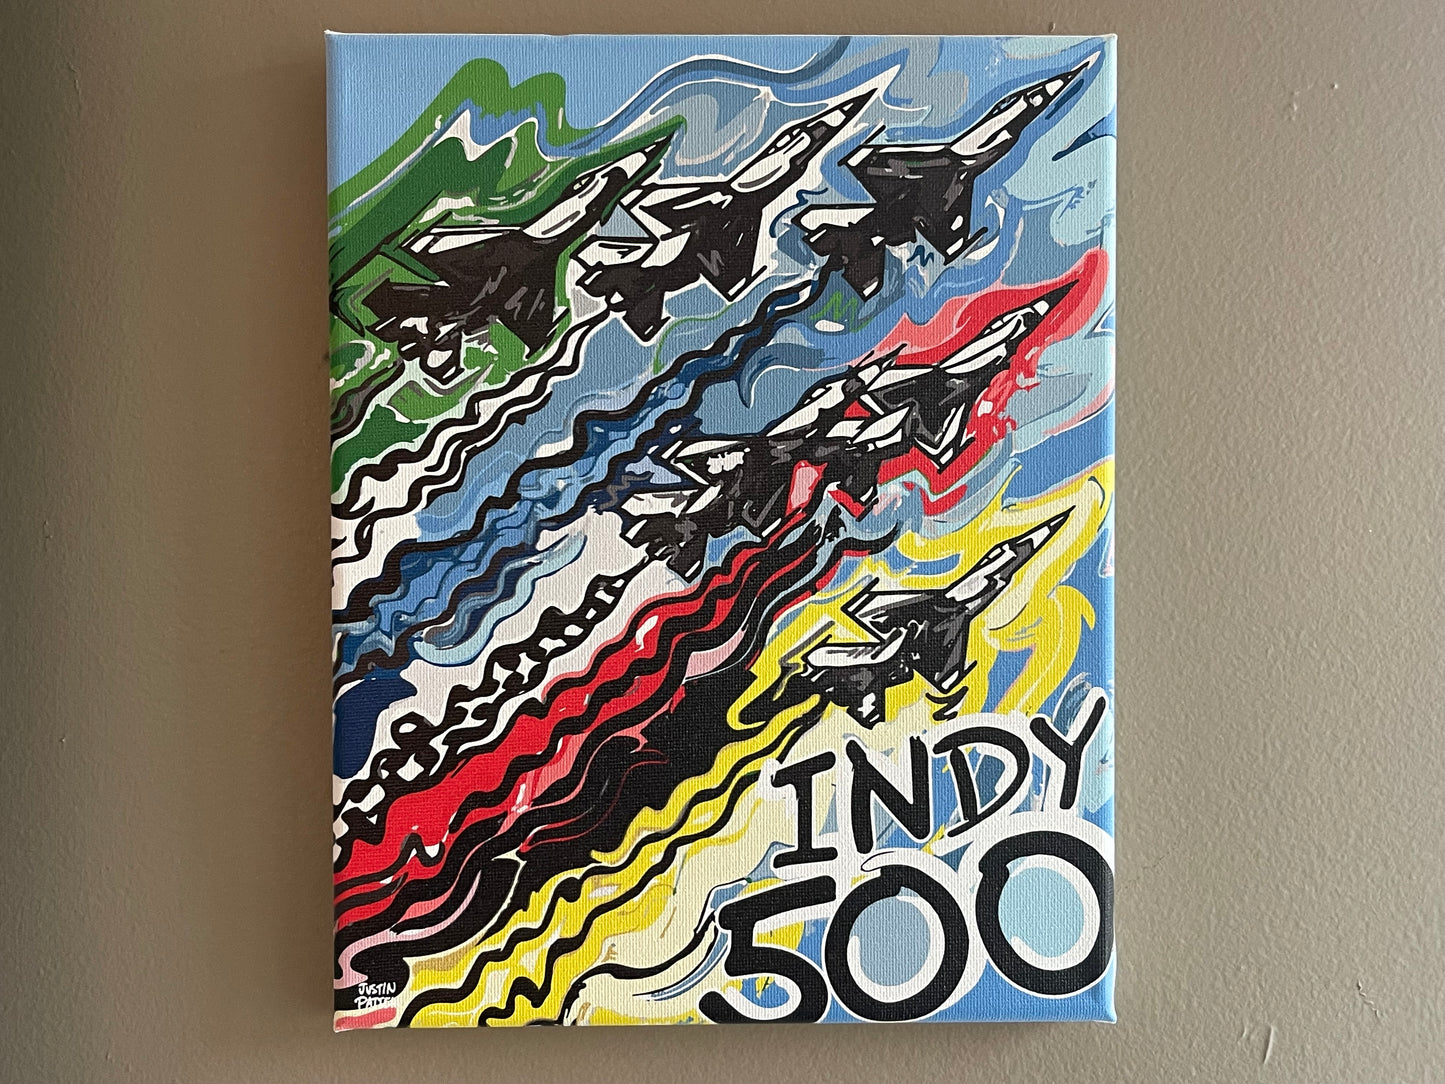 Indianapolis Motor Speedway 8"x10" Flyover Wrapped Canvas Print by Justin Patten